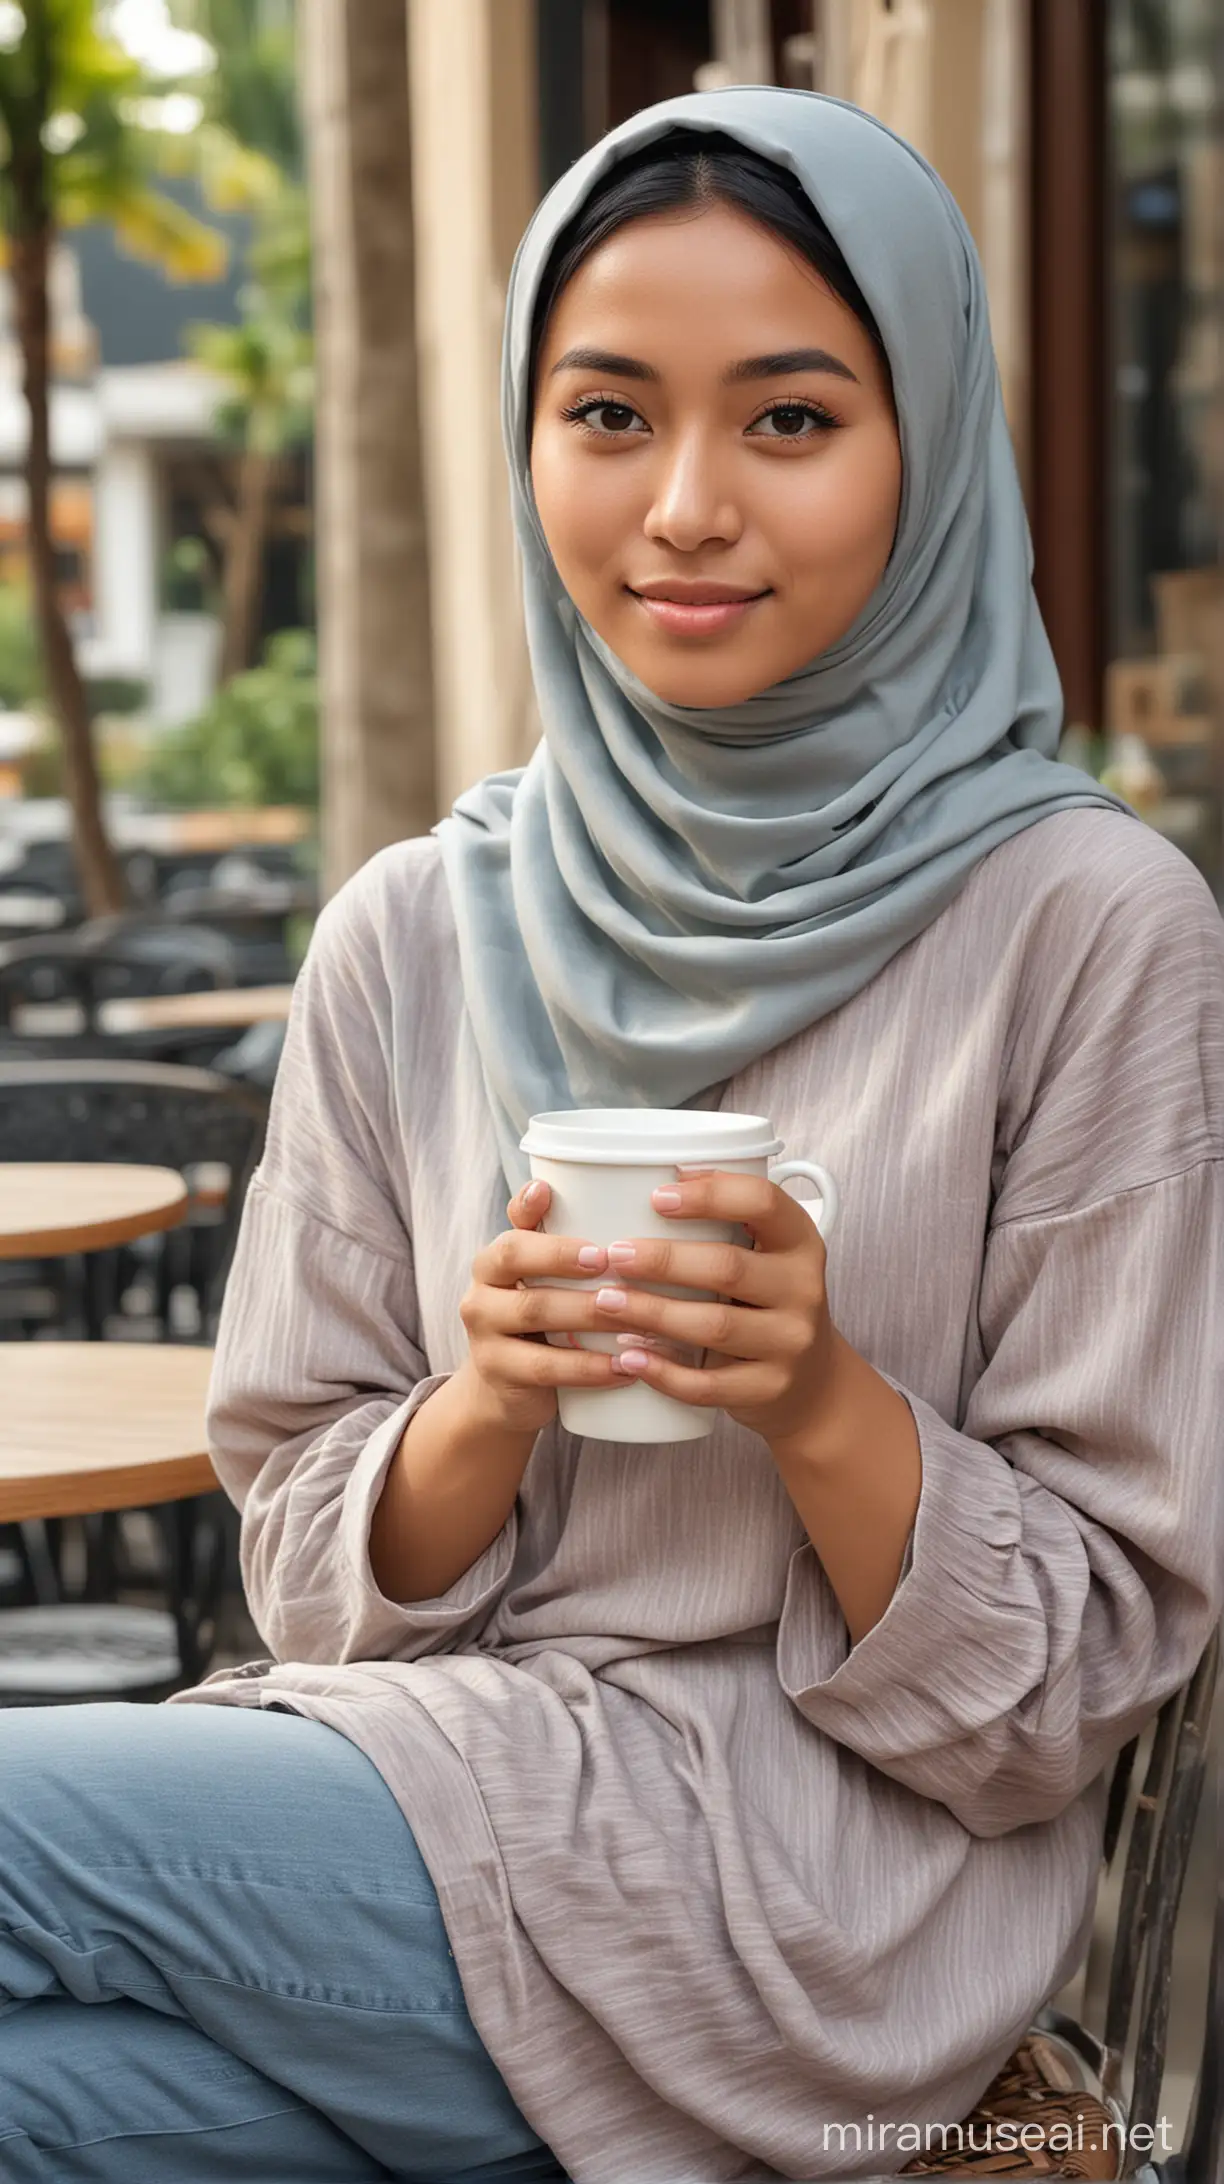 A 23 year old Indonesian woman is sitting on a chair holding a cup of coffee, wearing casual clothes and a hijab, outdoor cafe background, realistic image